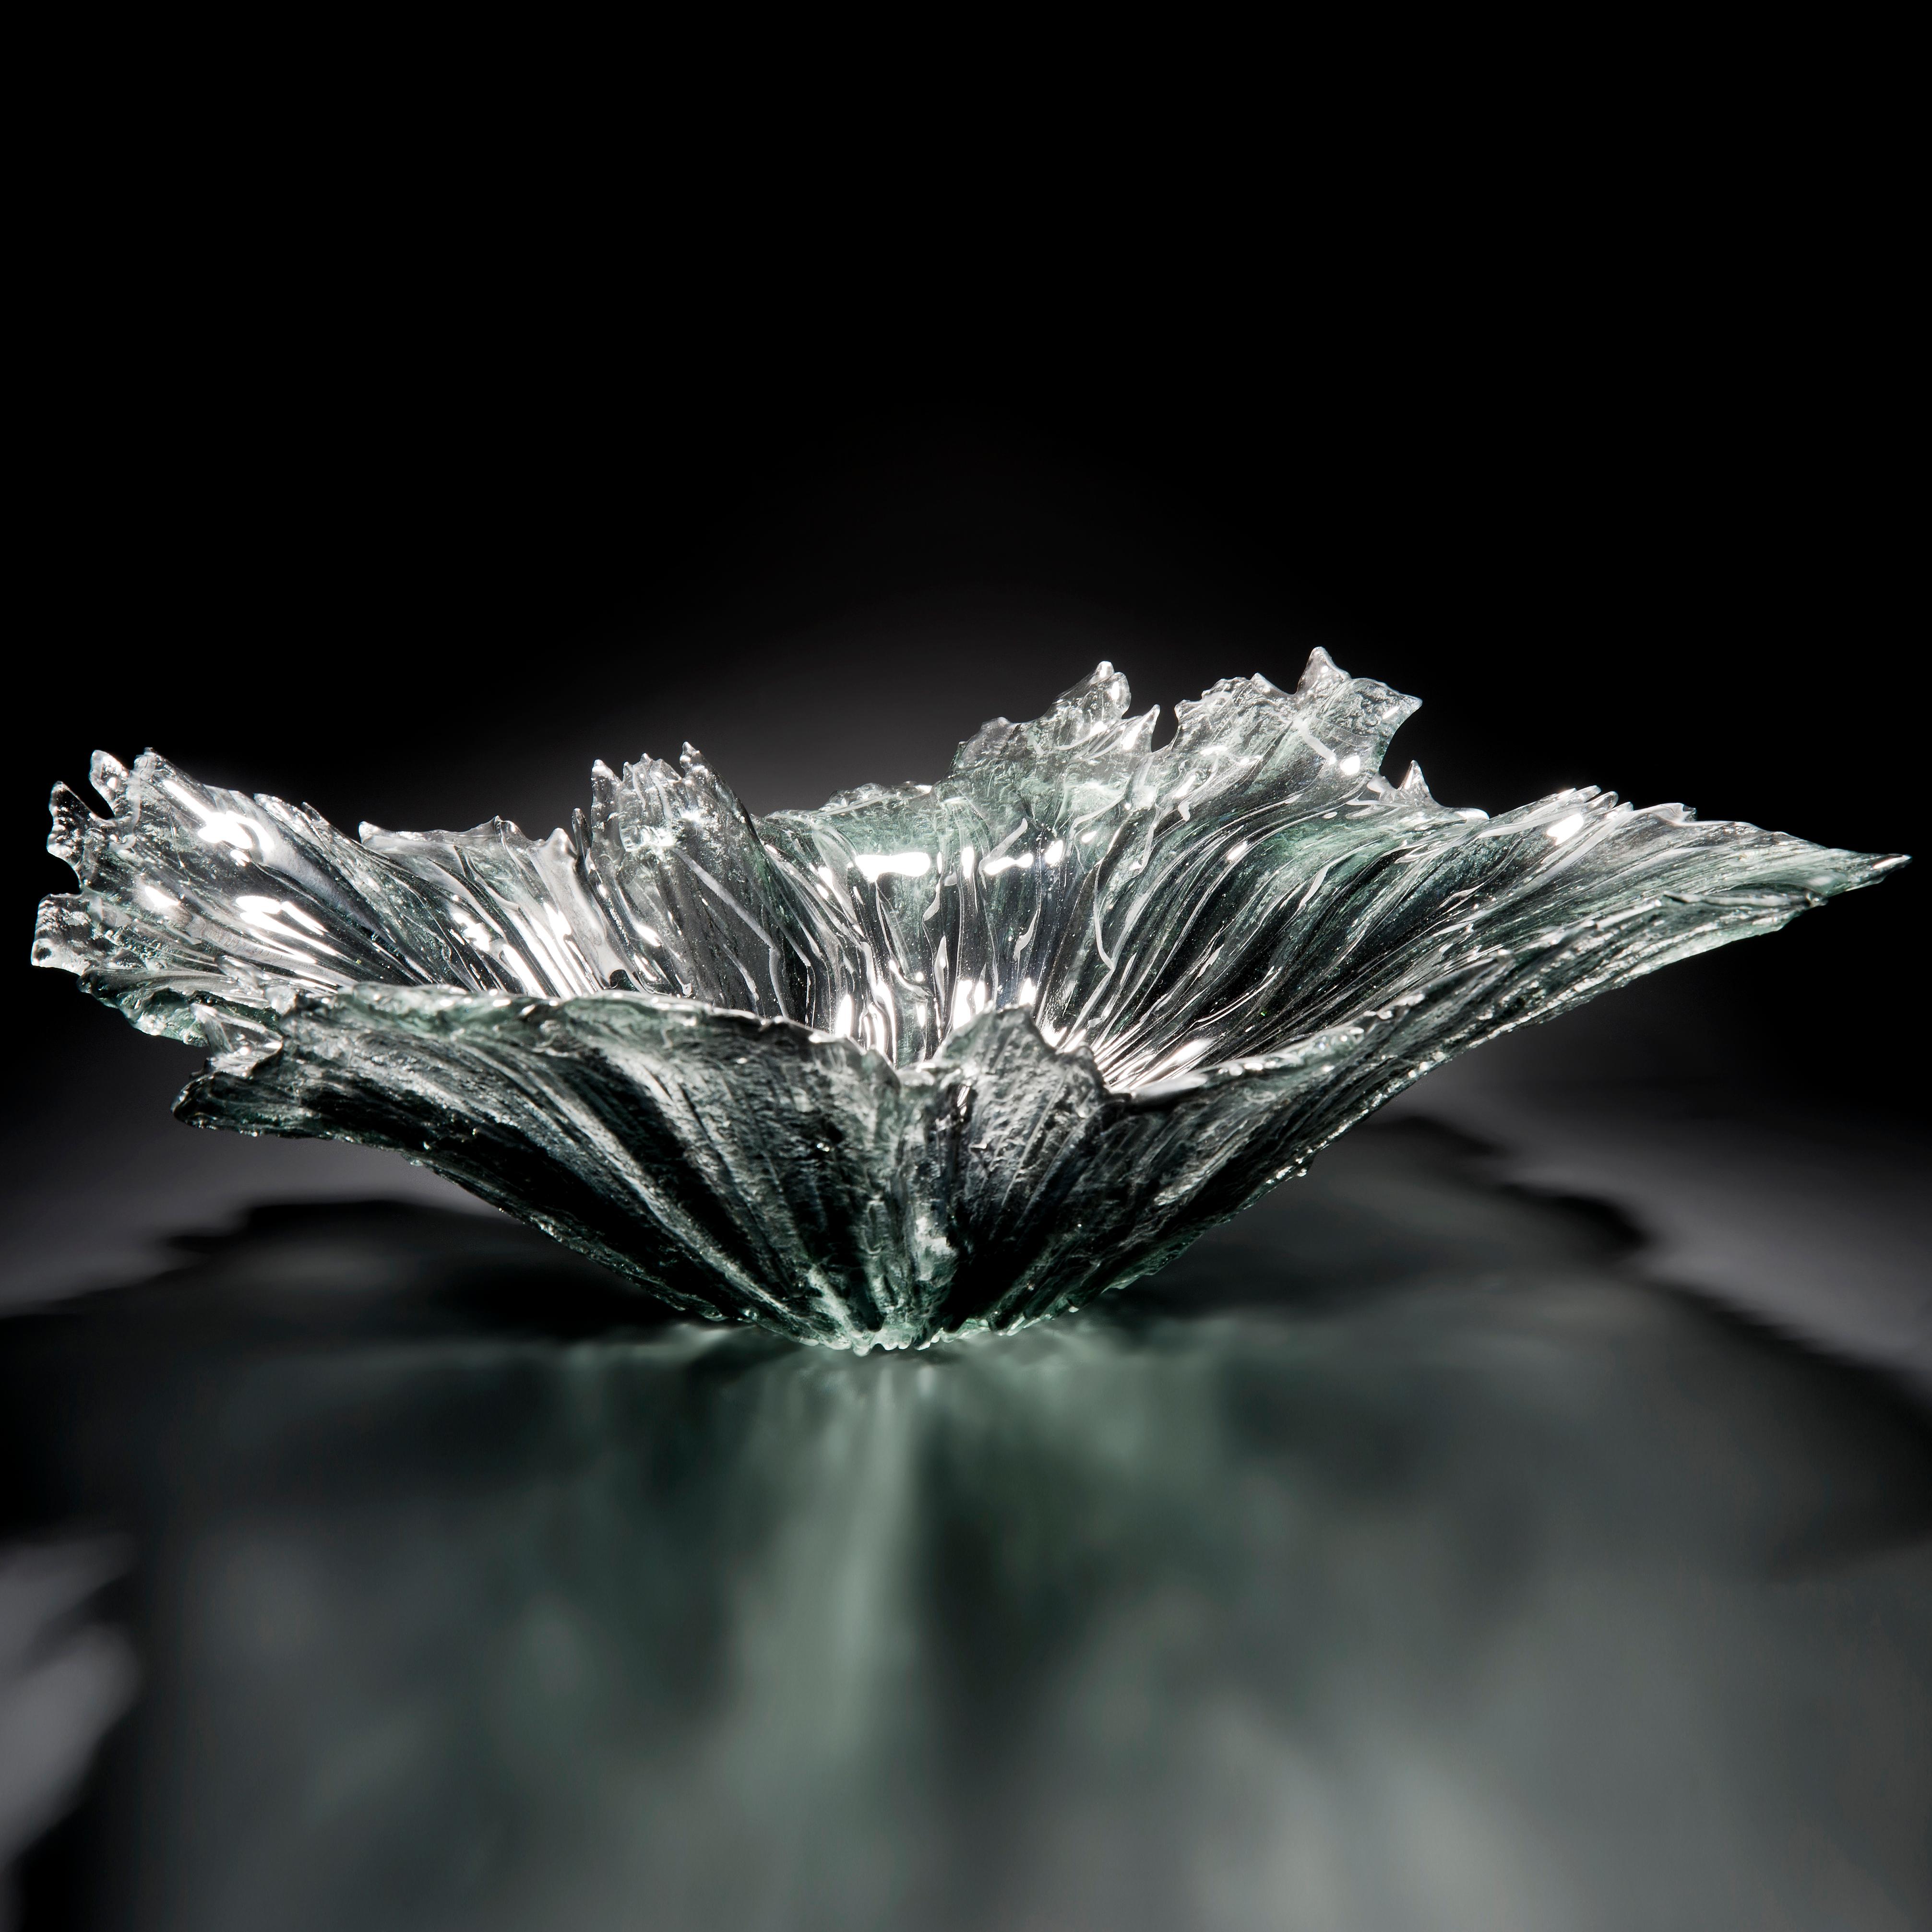 Coral bowl in grey, is a grey and clear glass organic centrepiece / bowl by the British artist Wayne Charmer. Combining drama, movement and scale, the glass resembles an impact splash in to water, simply stunning.

For Wayne Charmer, the fascination